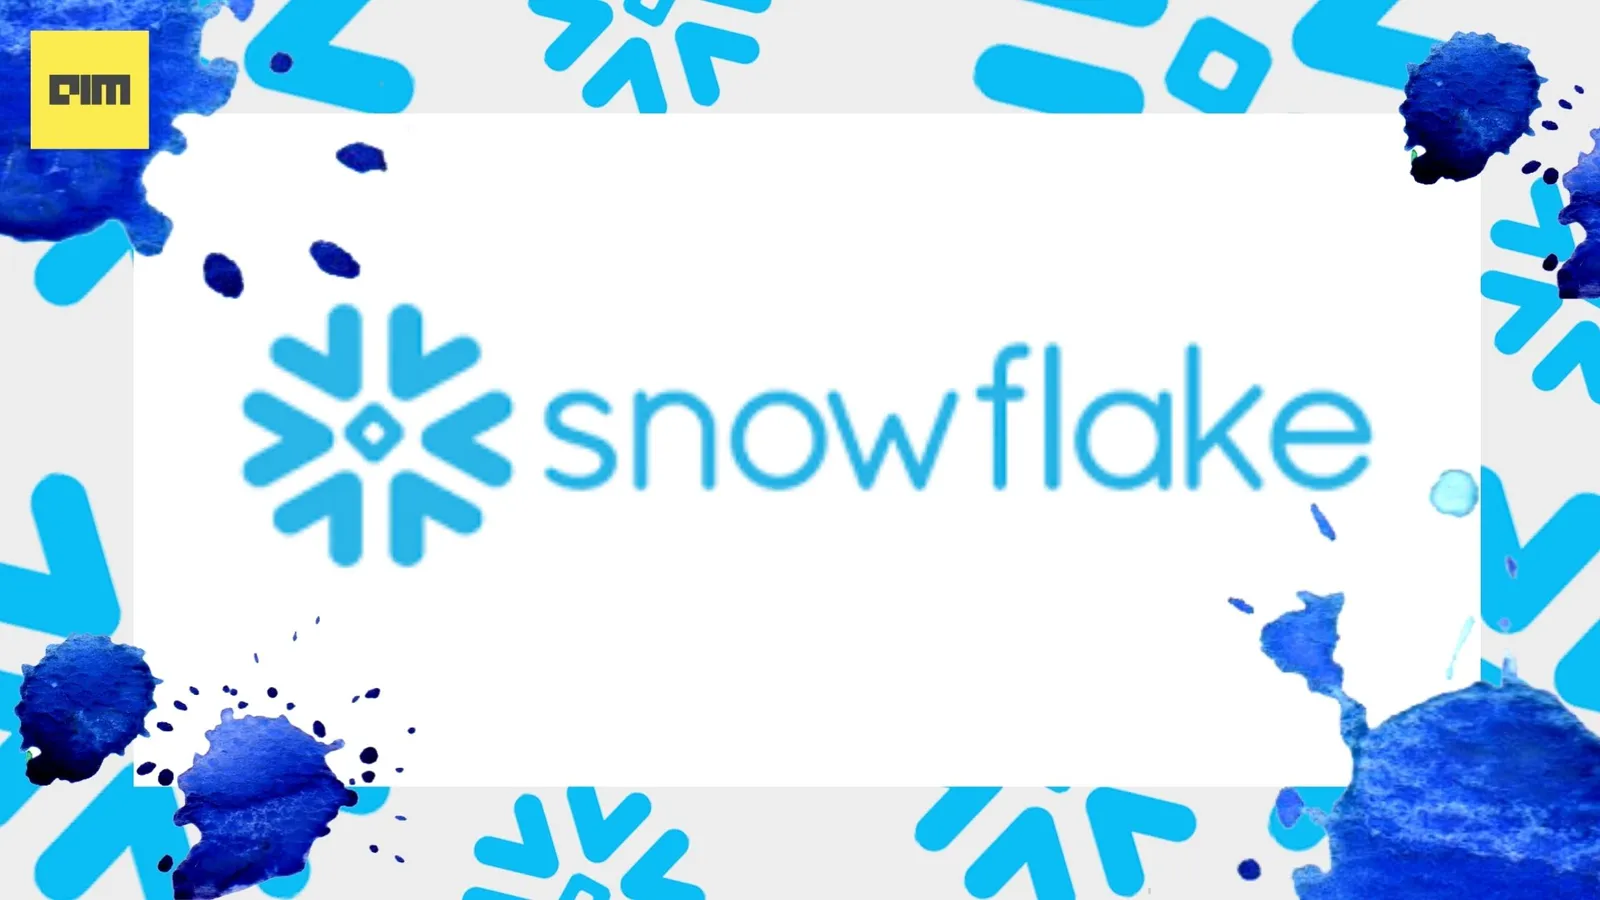 Top 7 Free Resources To Learn Snowflake